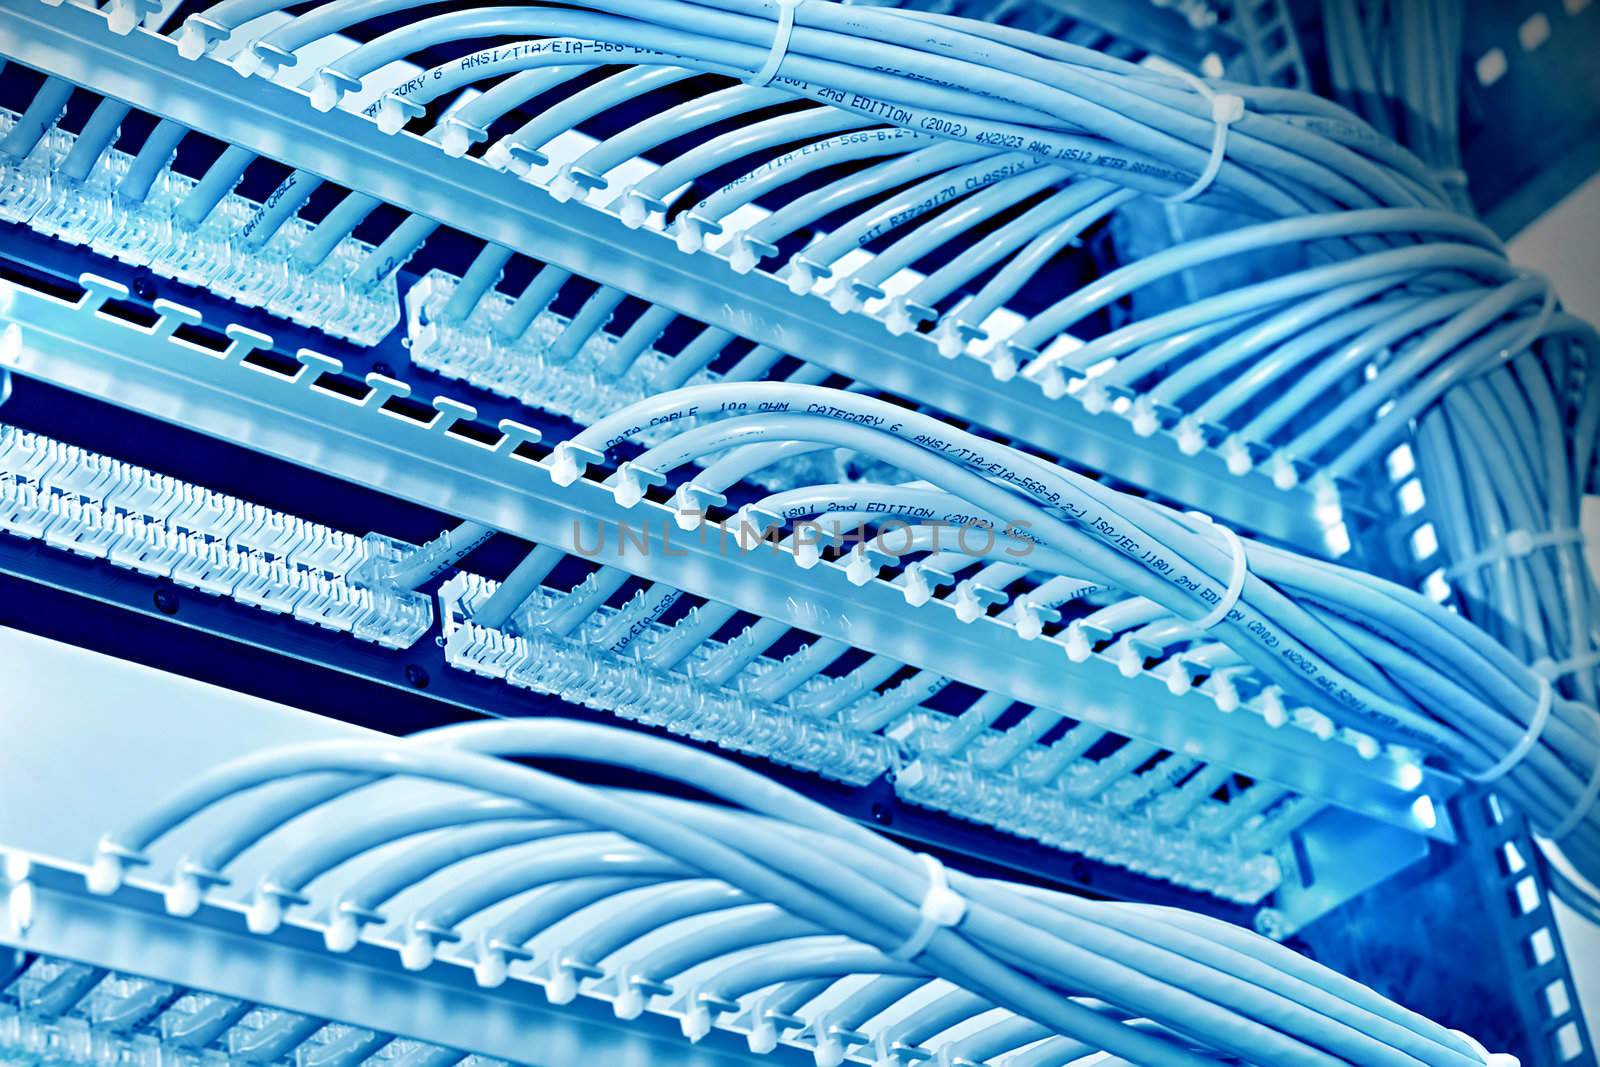 kind of wiring closet patch panels with 6-th category in the background, blue tone